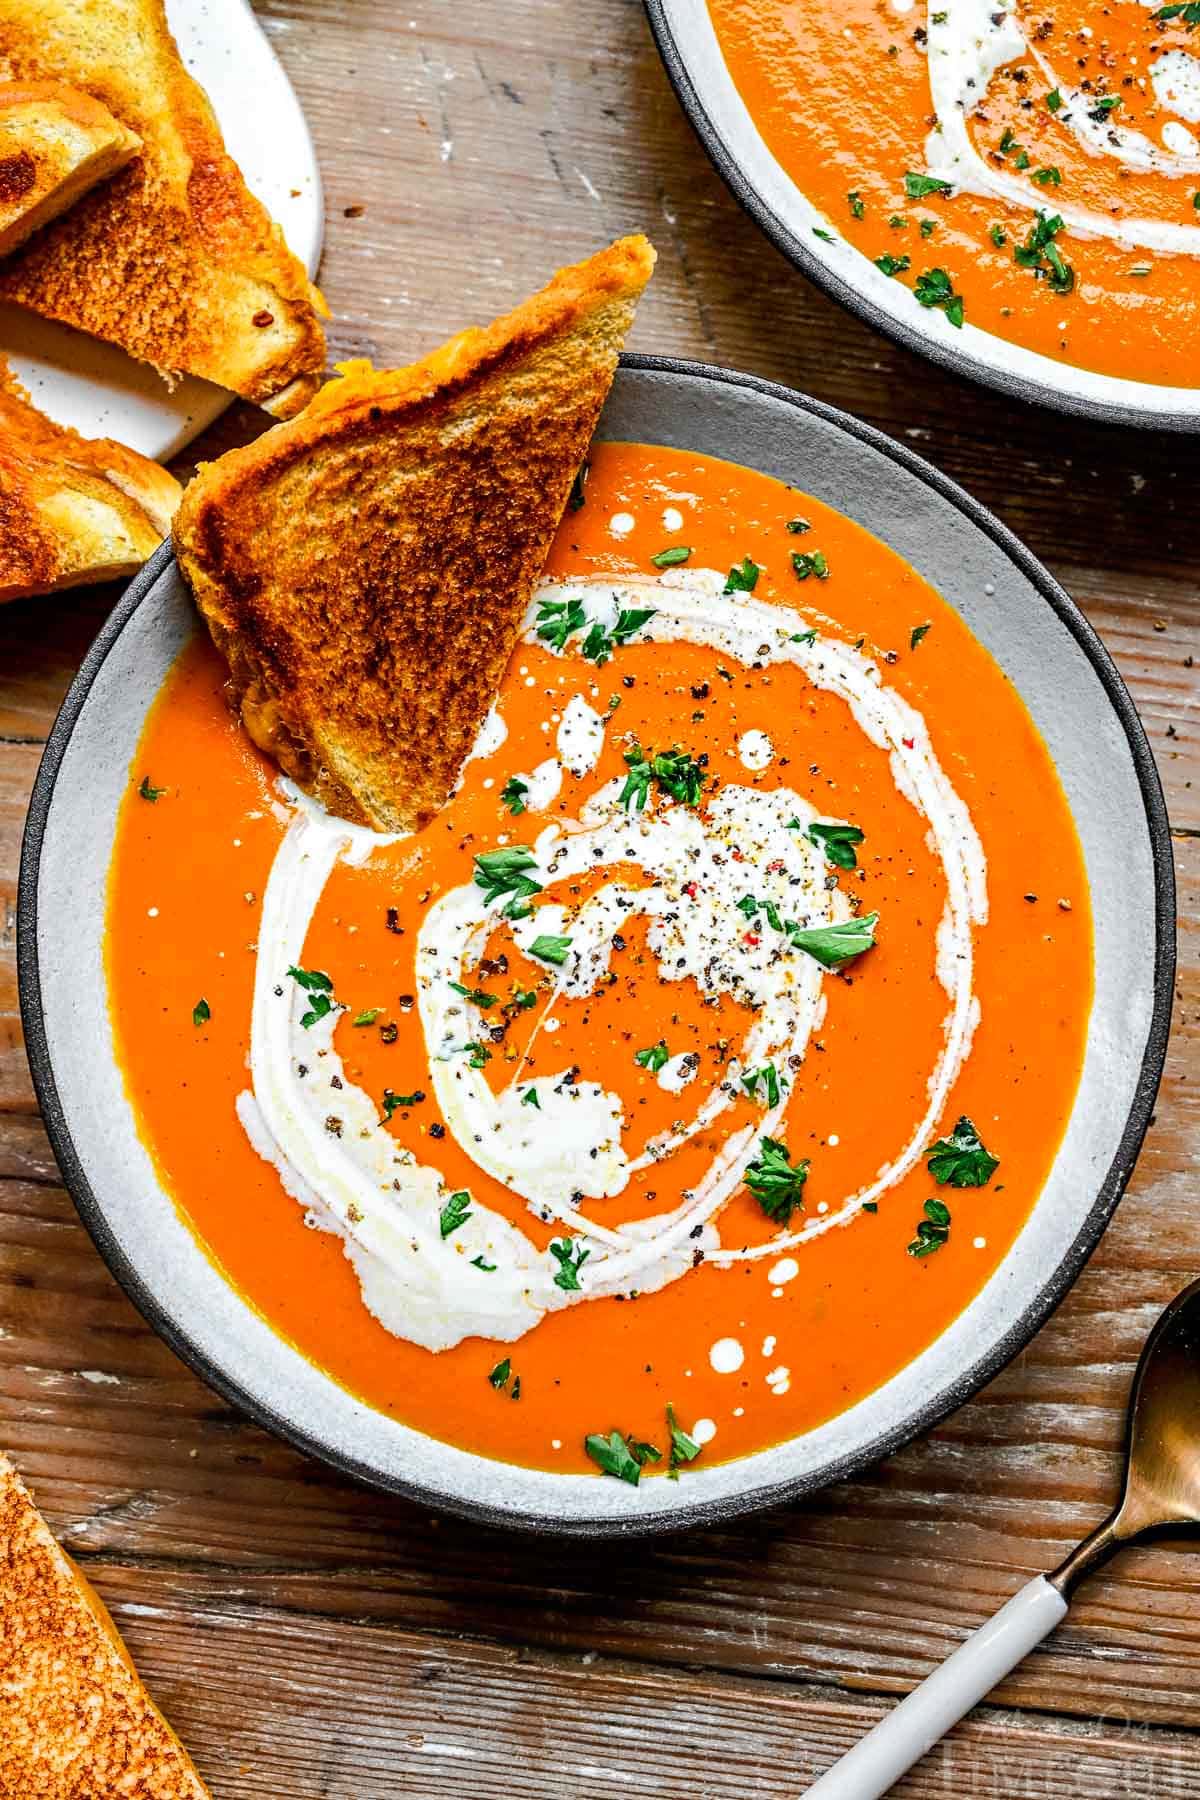 top down view of bowl of tomato soup with half of a grilled cheese sandwich stuck in it. soup has been drizzled with heavy cream, topped with fresh basil and black pepper.